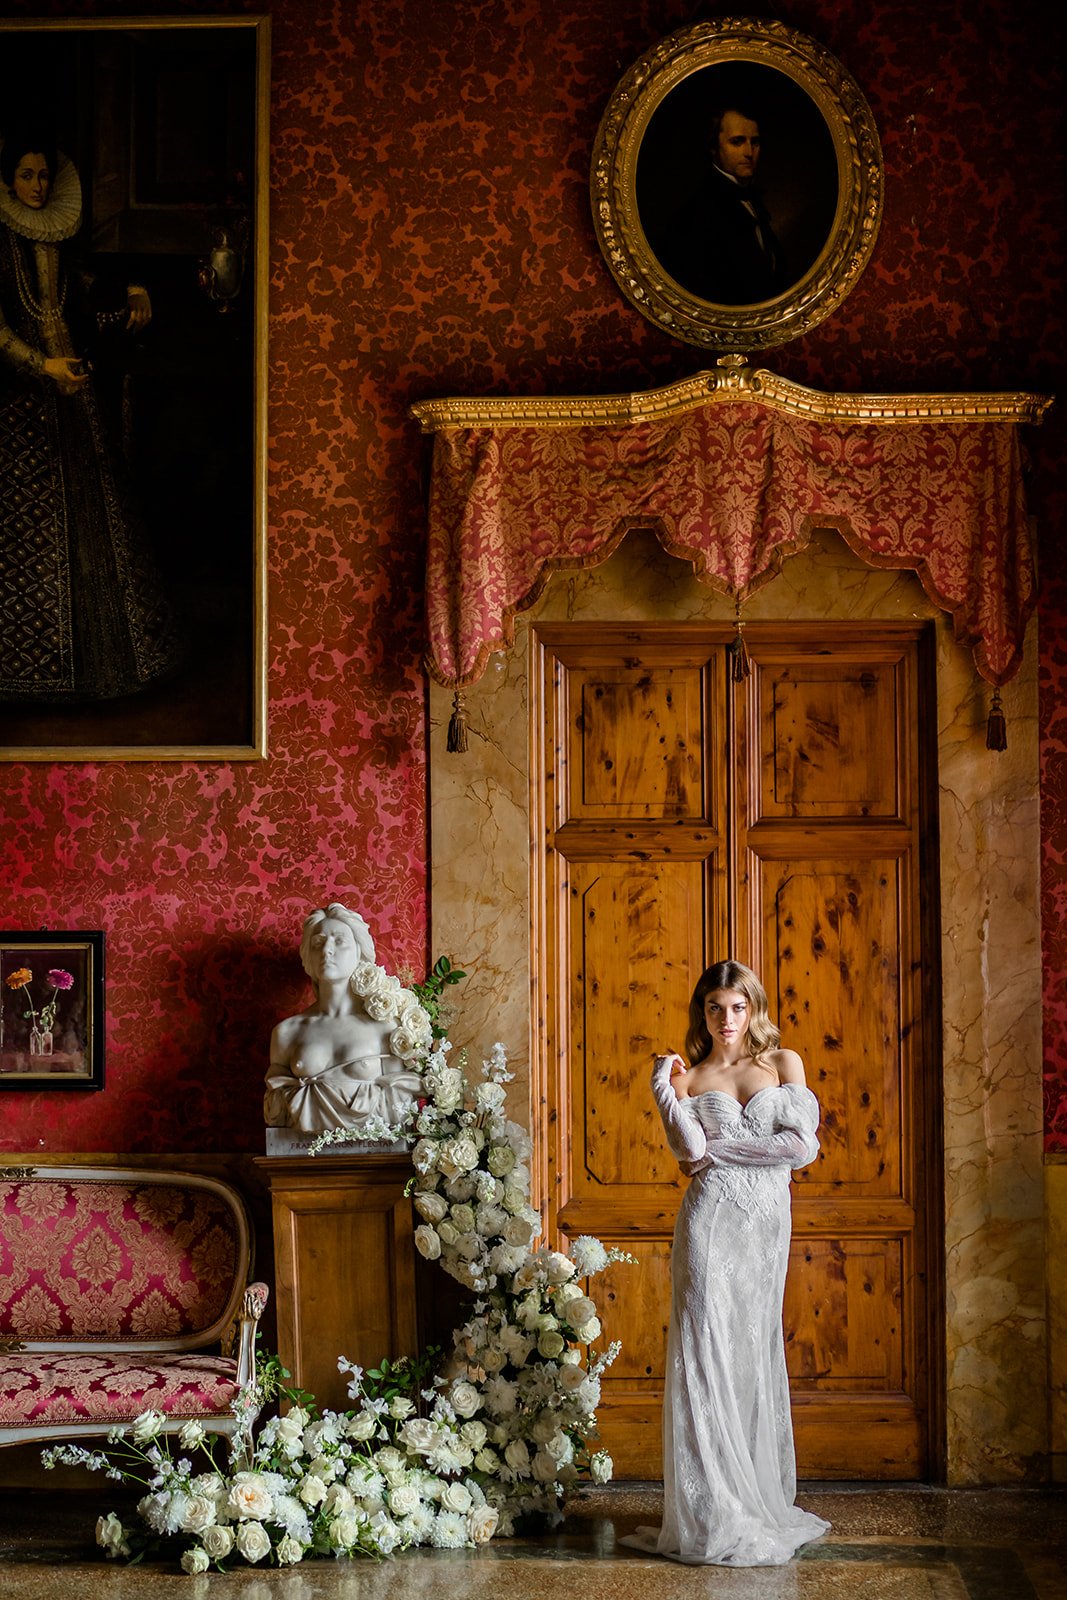 luxury-florence-wedding-events-by-paulina-italy-planner-villa-maiano-13.jpg